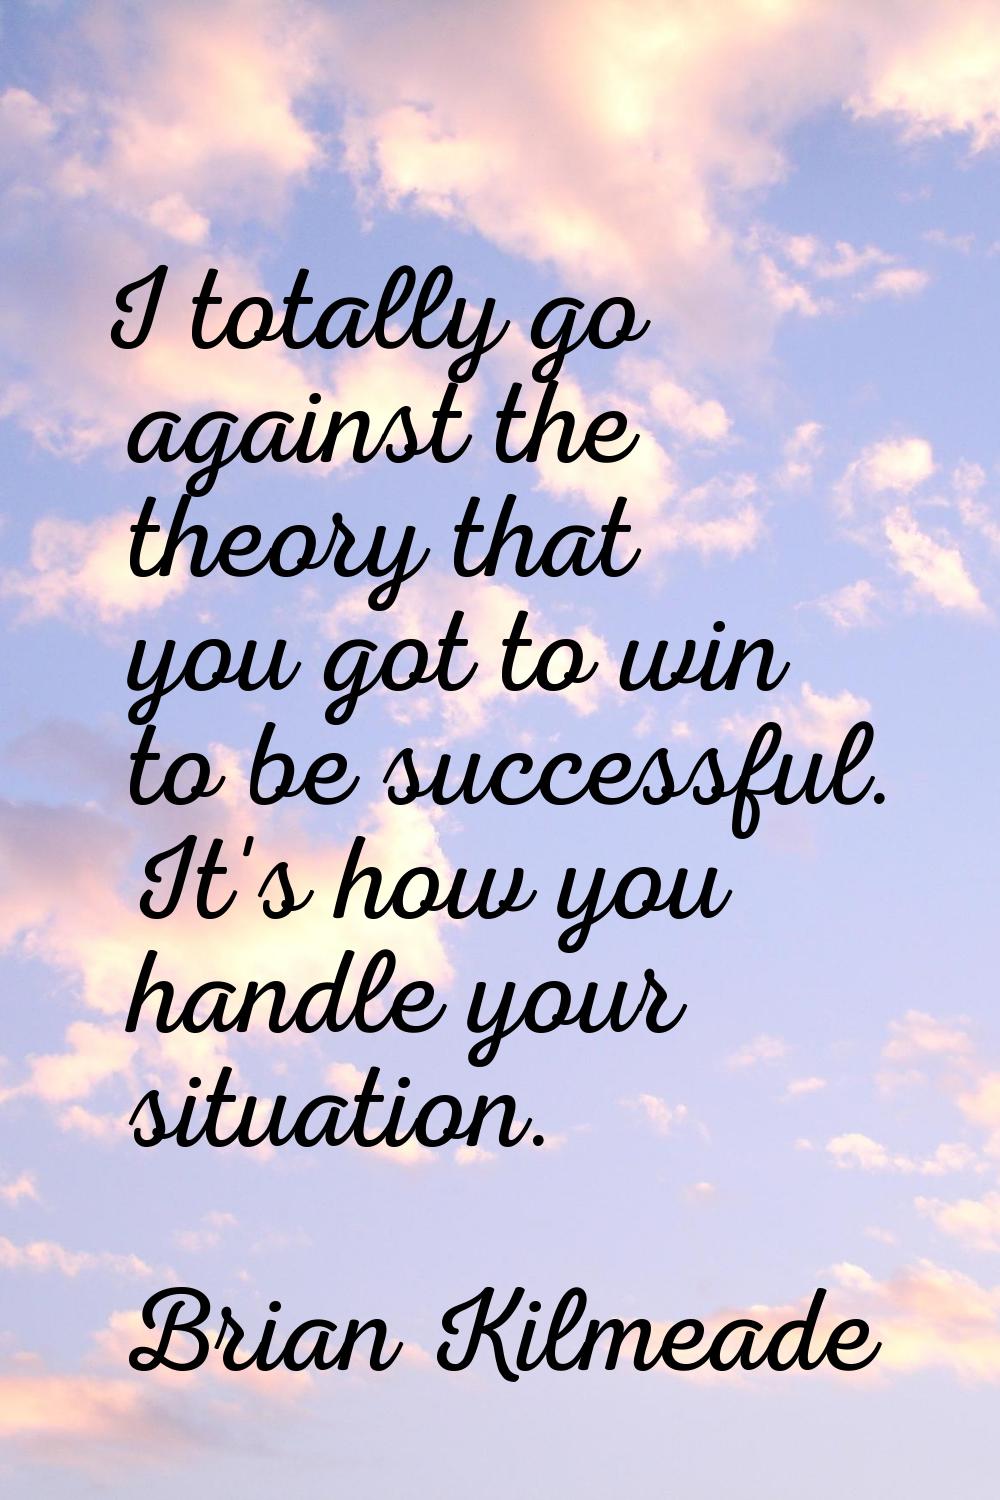 I totally go against the theory that you got to win to be successful. It's how you handle your situ